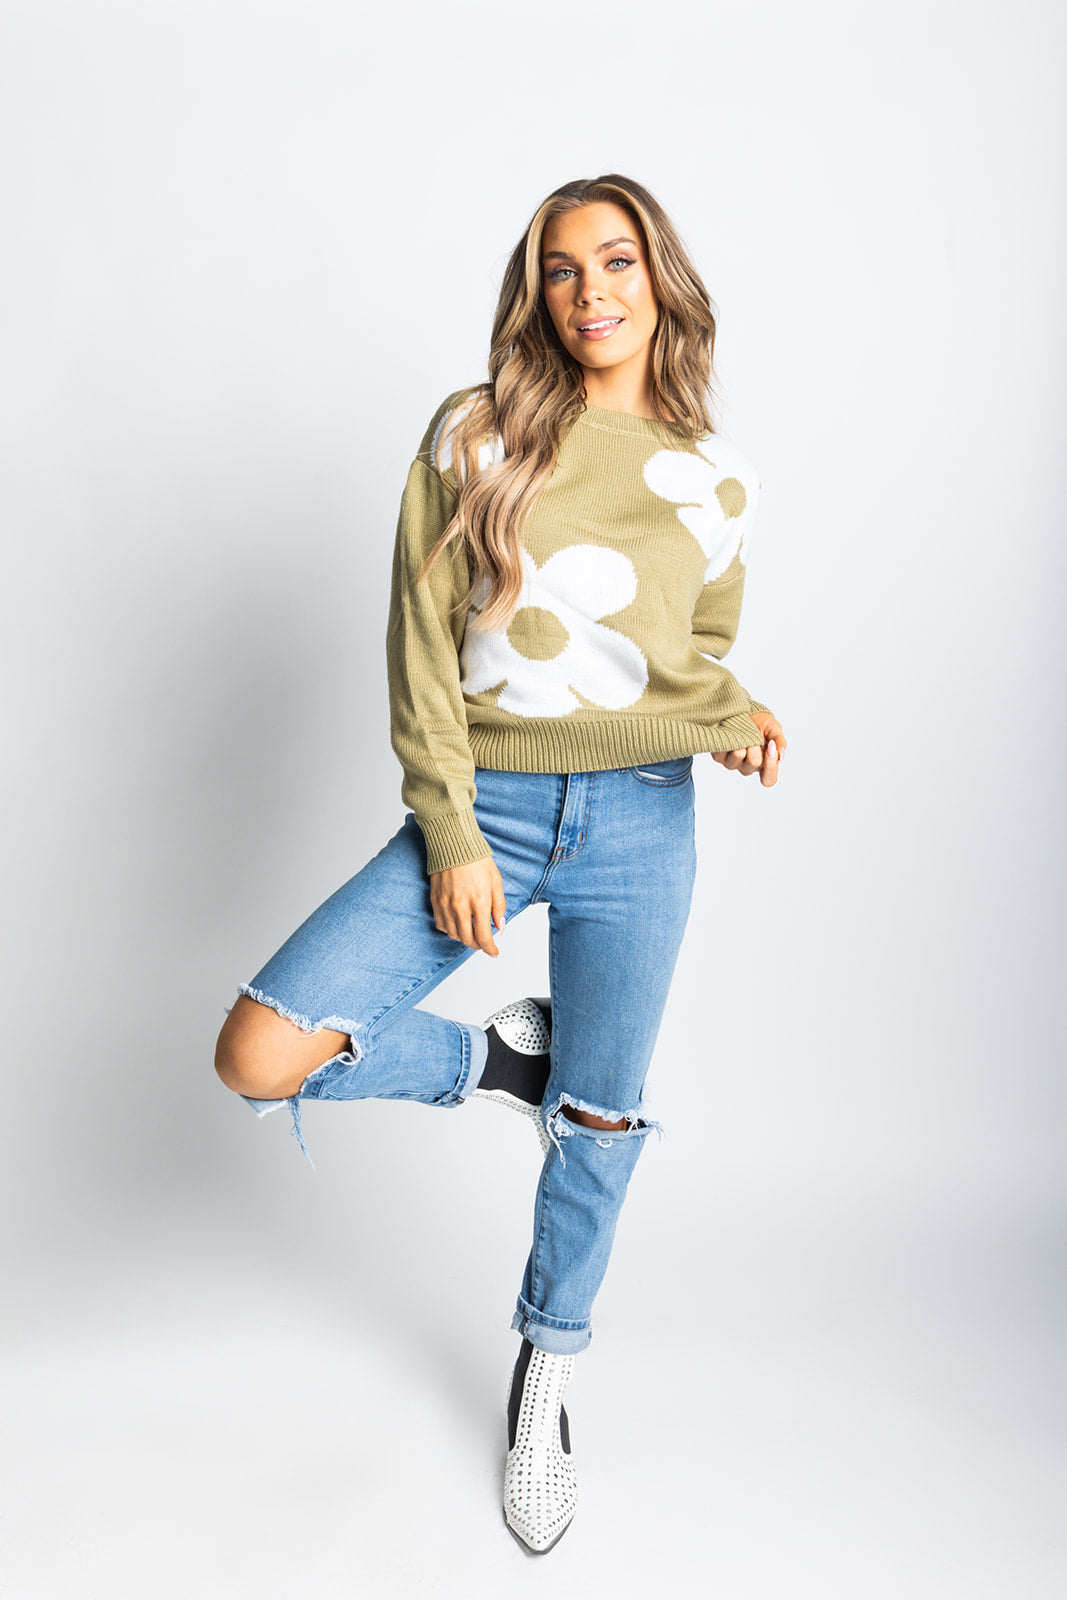 Spring Fling Floral Sweater [S-XL]